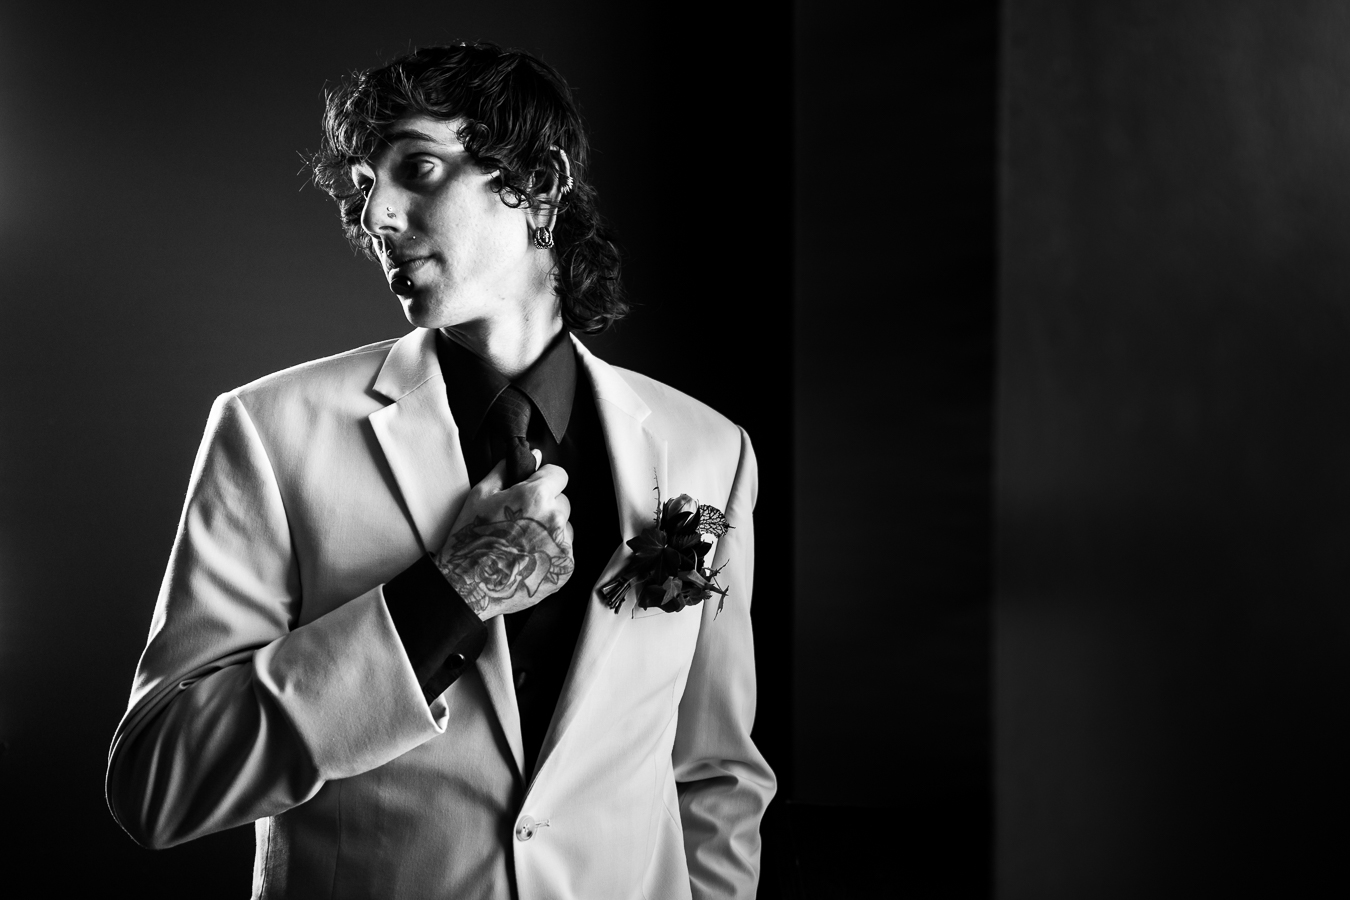 Cork Factory Hotel Wedding Photographer, lisa rhinehart, captures this black and white image of the groom looking off into the distance as he grabs his tie showing off his rose tattoo 